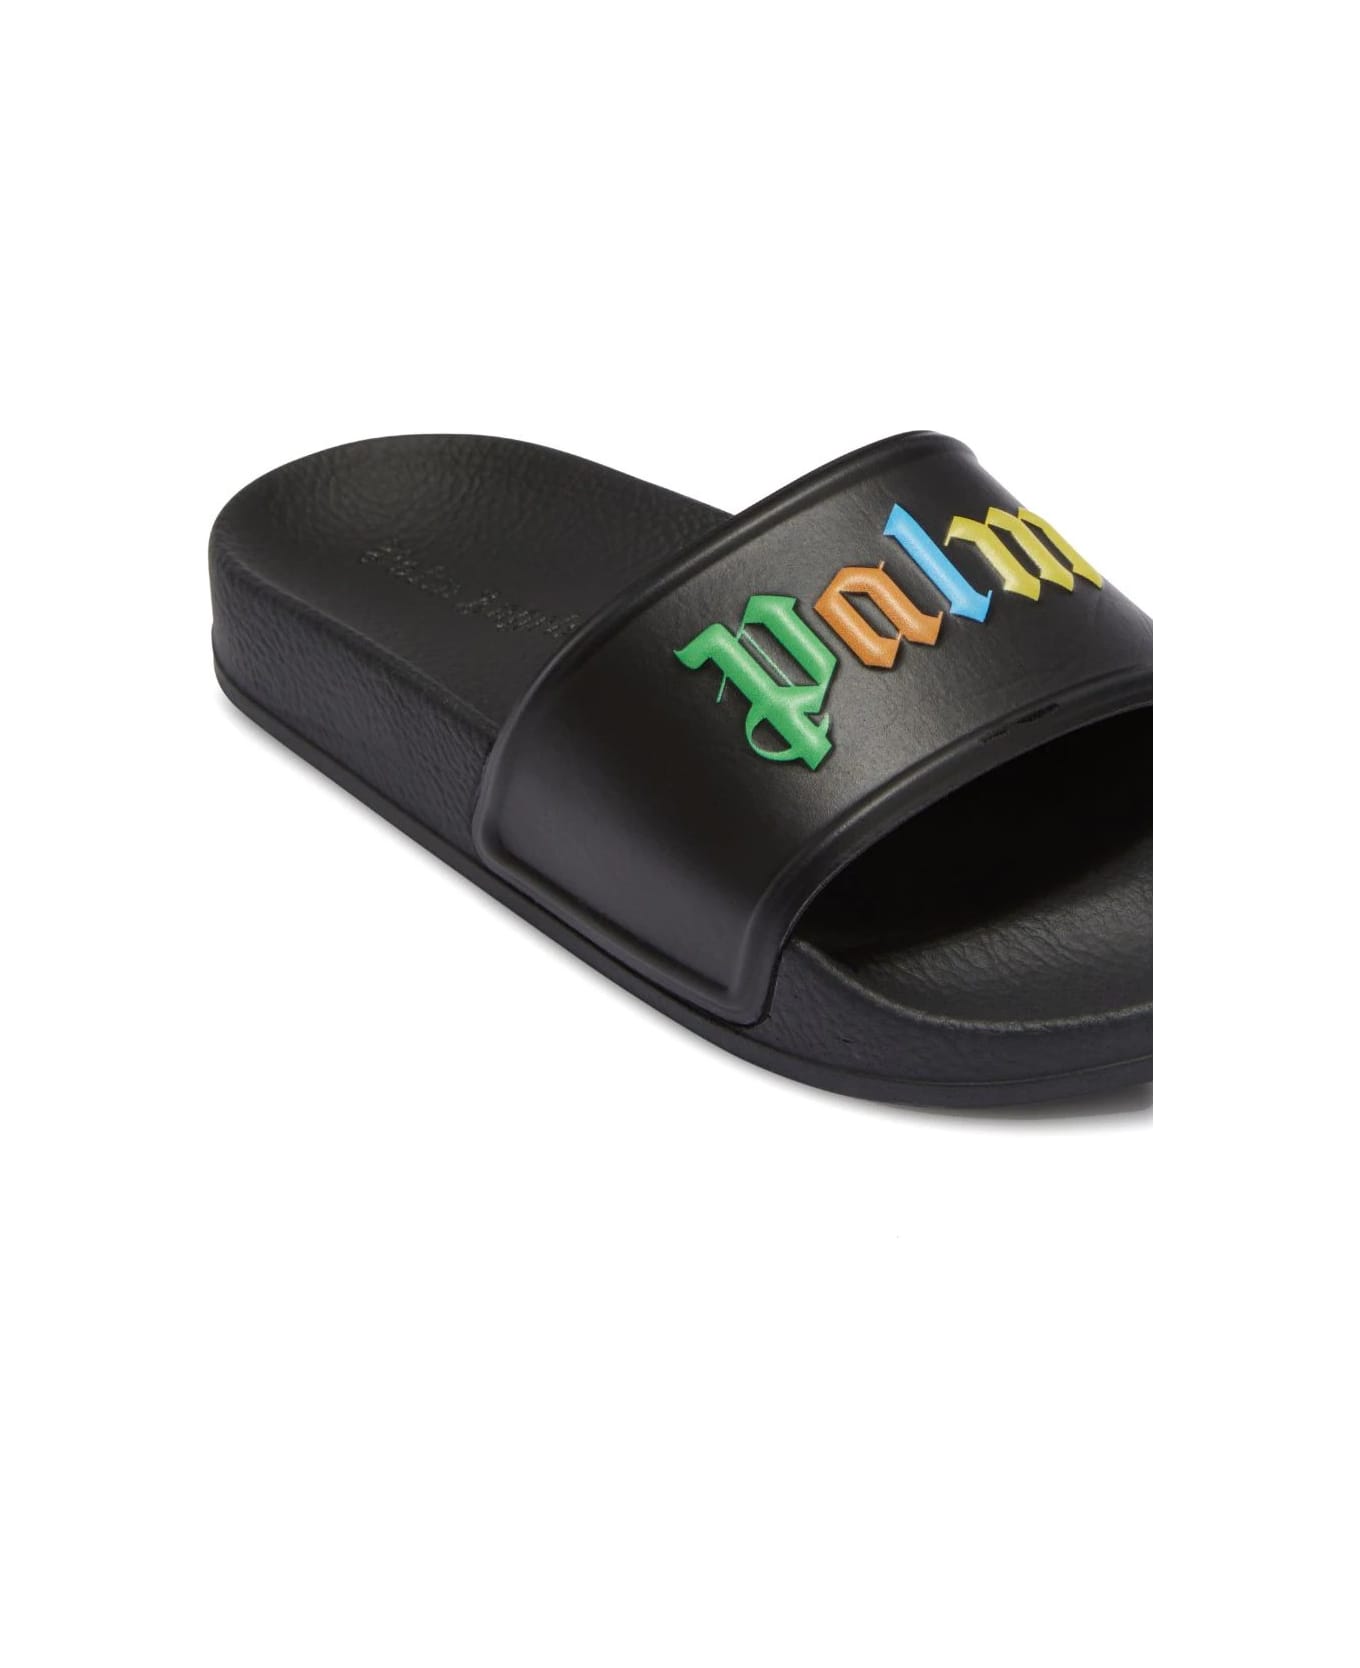 Palm Angels Black Slippers With Multicoloured Logo - Black